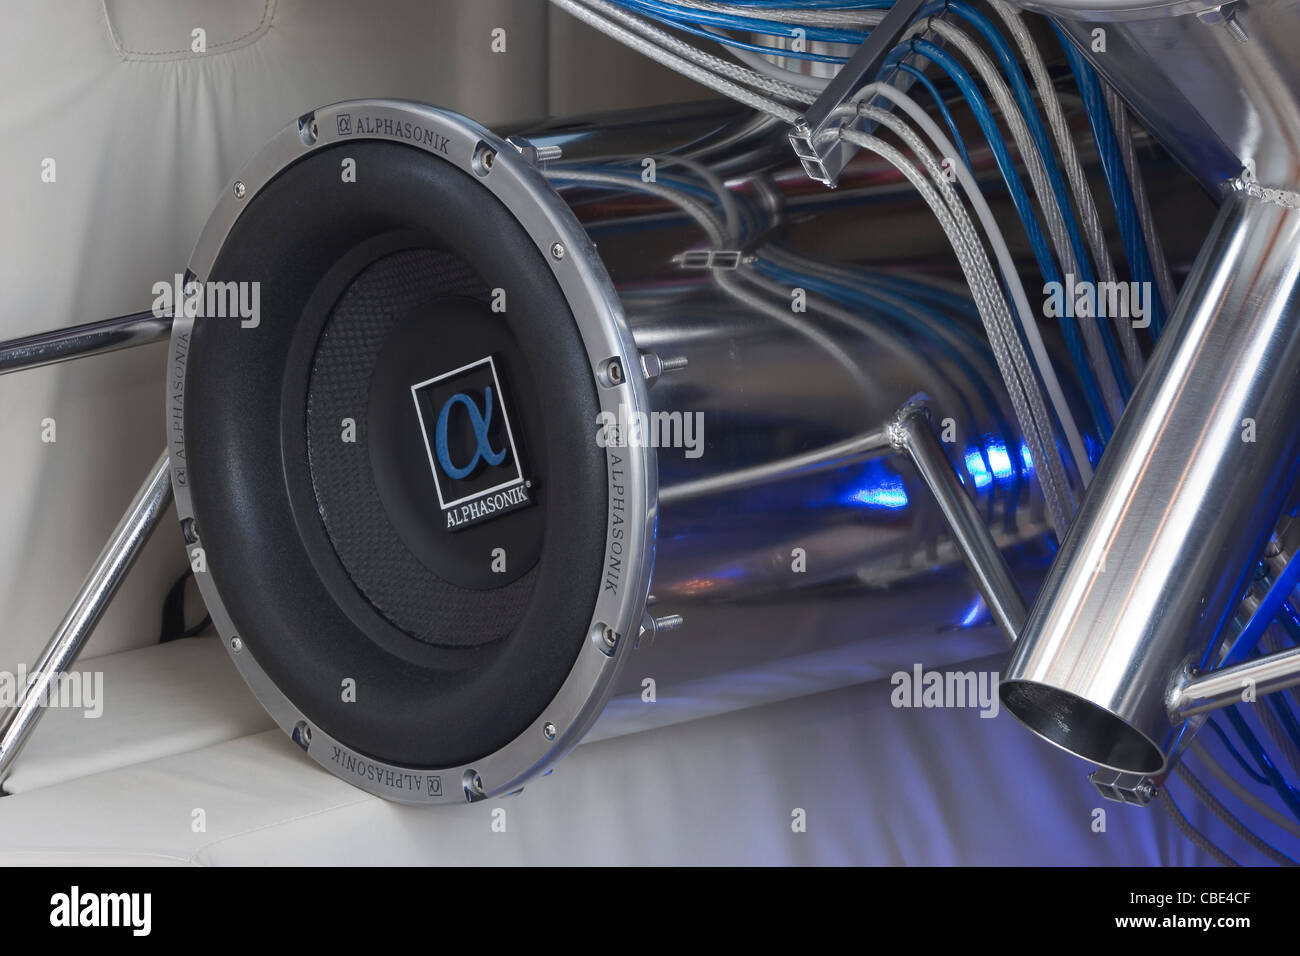 Subwoofer stereo speaker in a fully custom installation inside a heavily modified vehicle Stock Photo